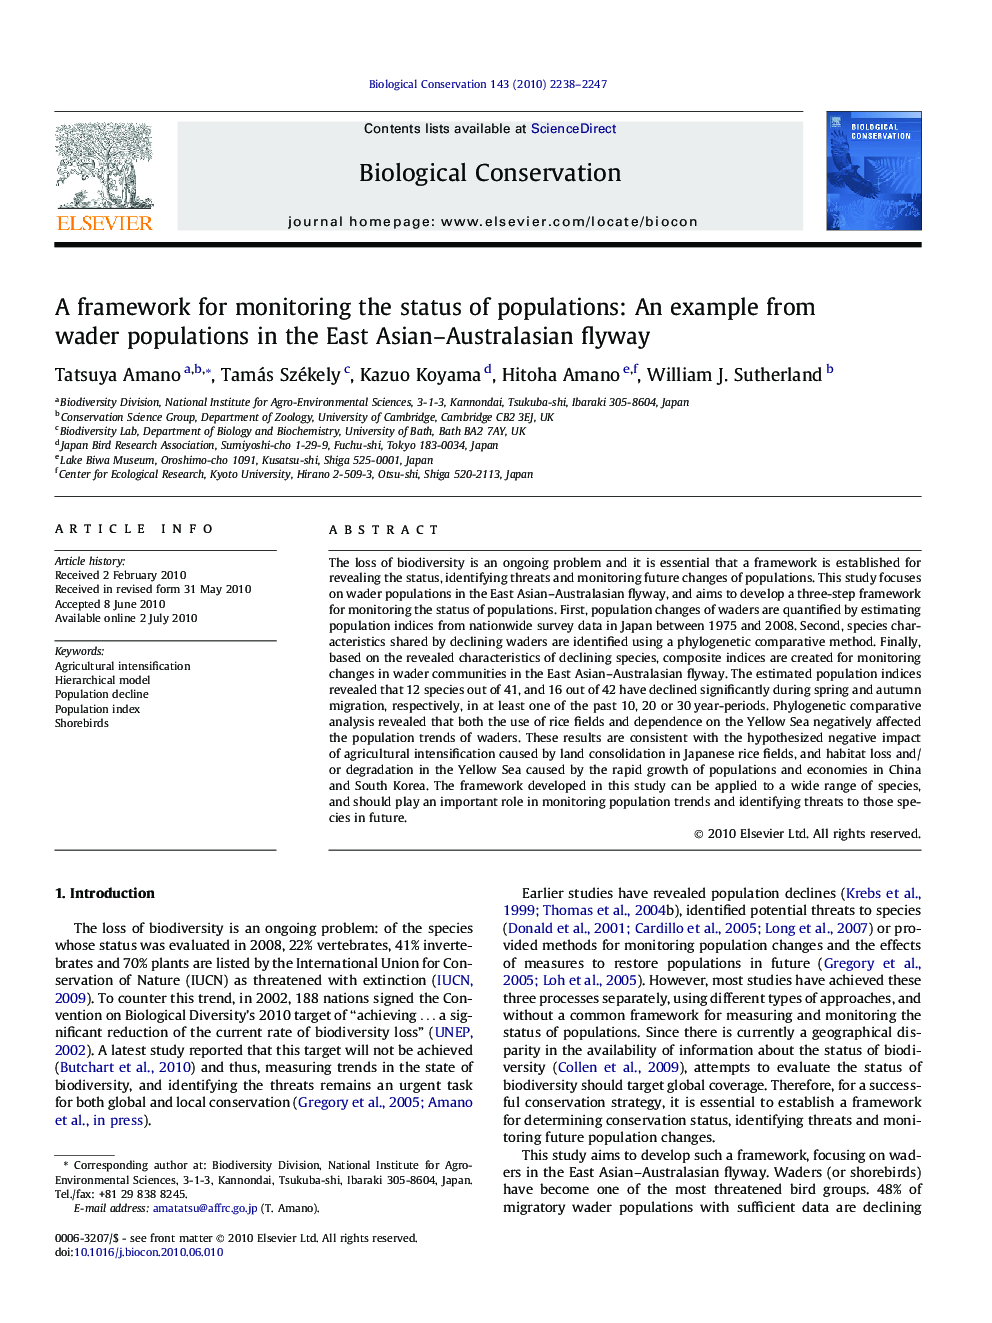 A framework for monitoring the status of populations: An example from wader populations in the East Asian–Australasian flyway